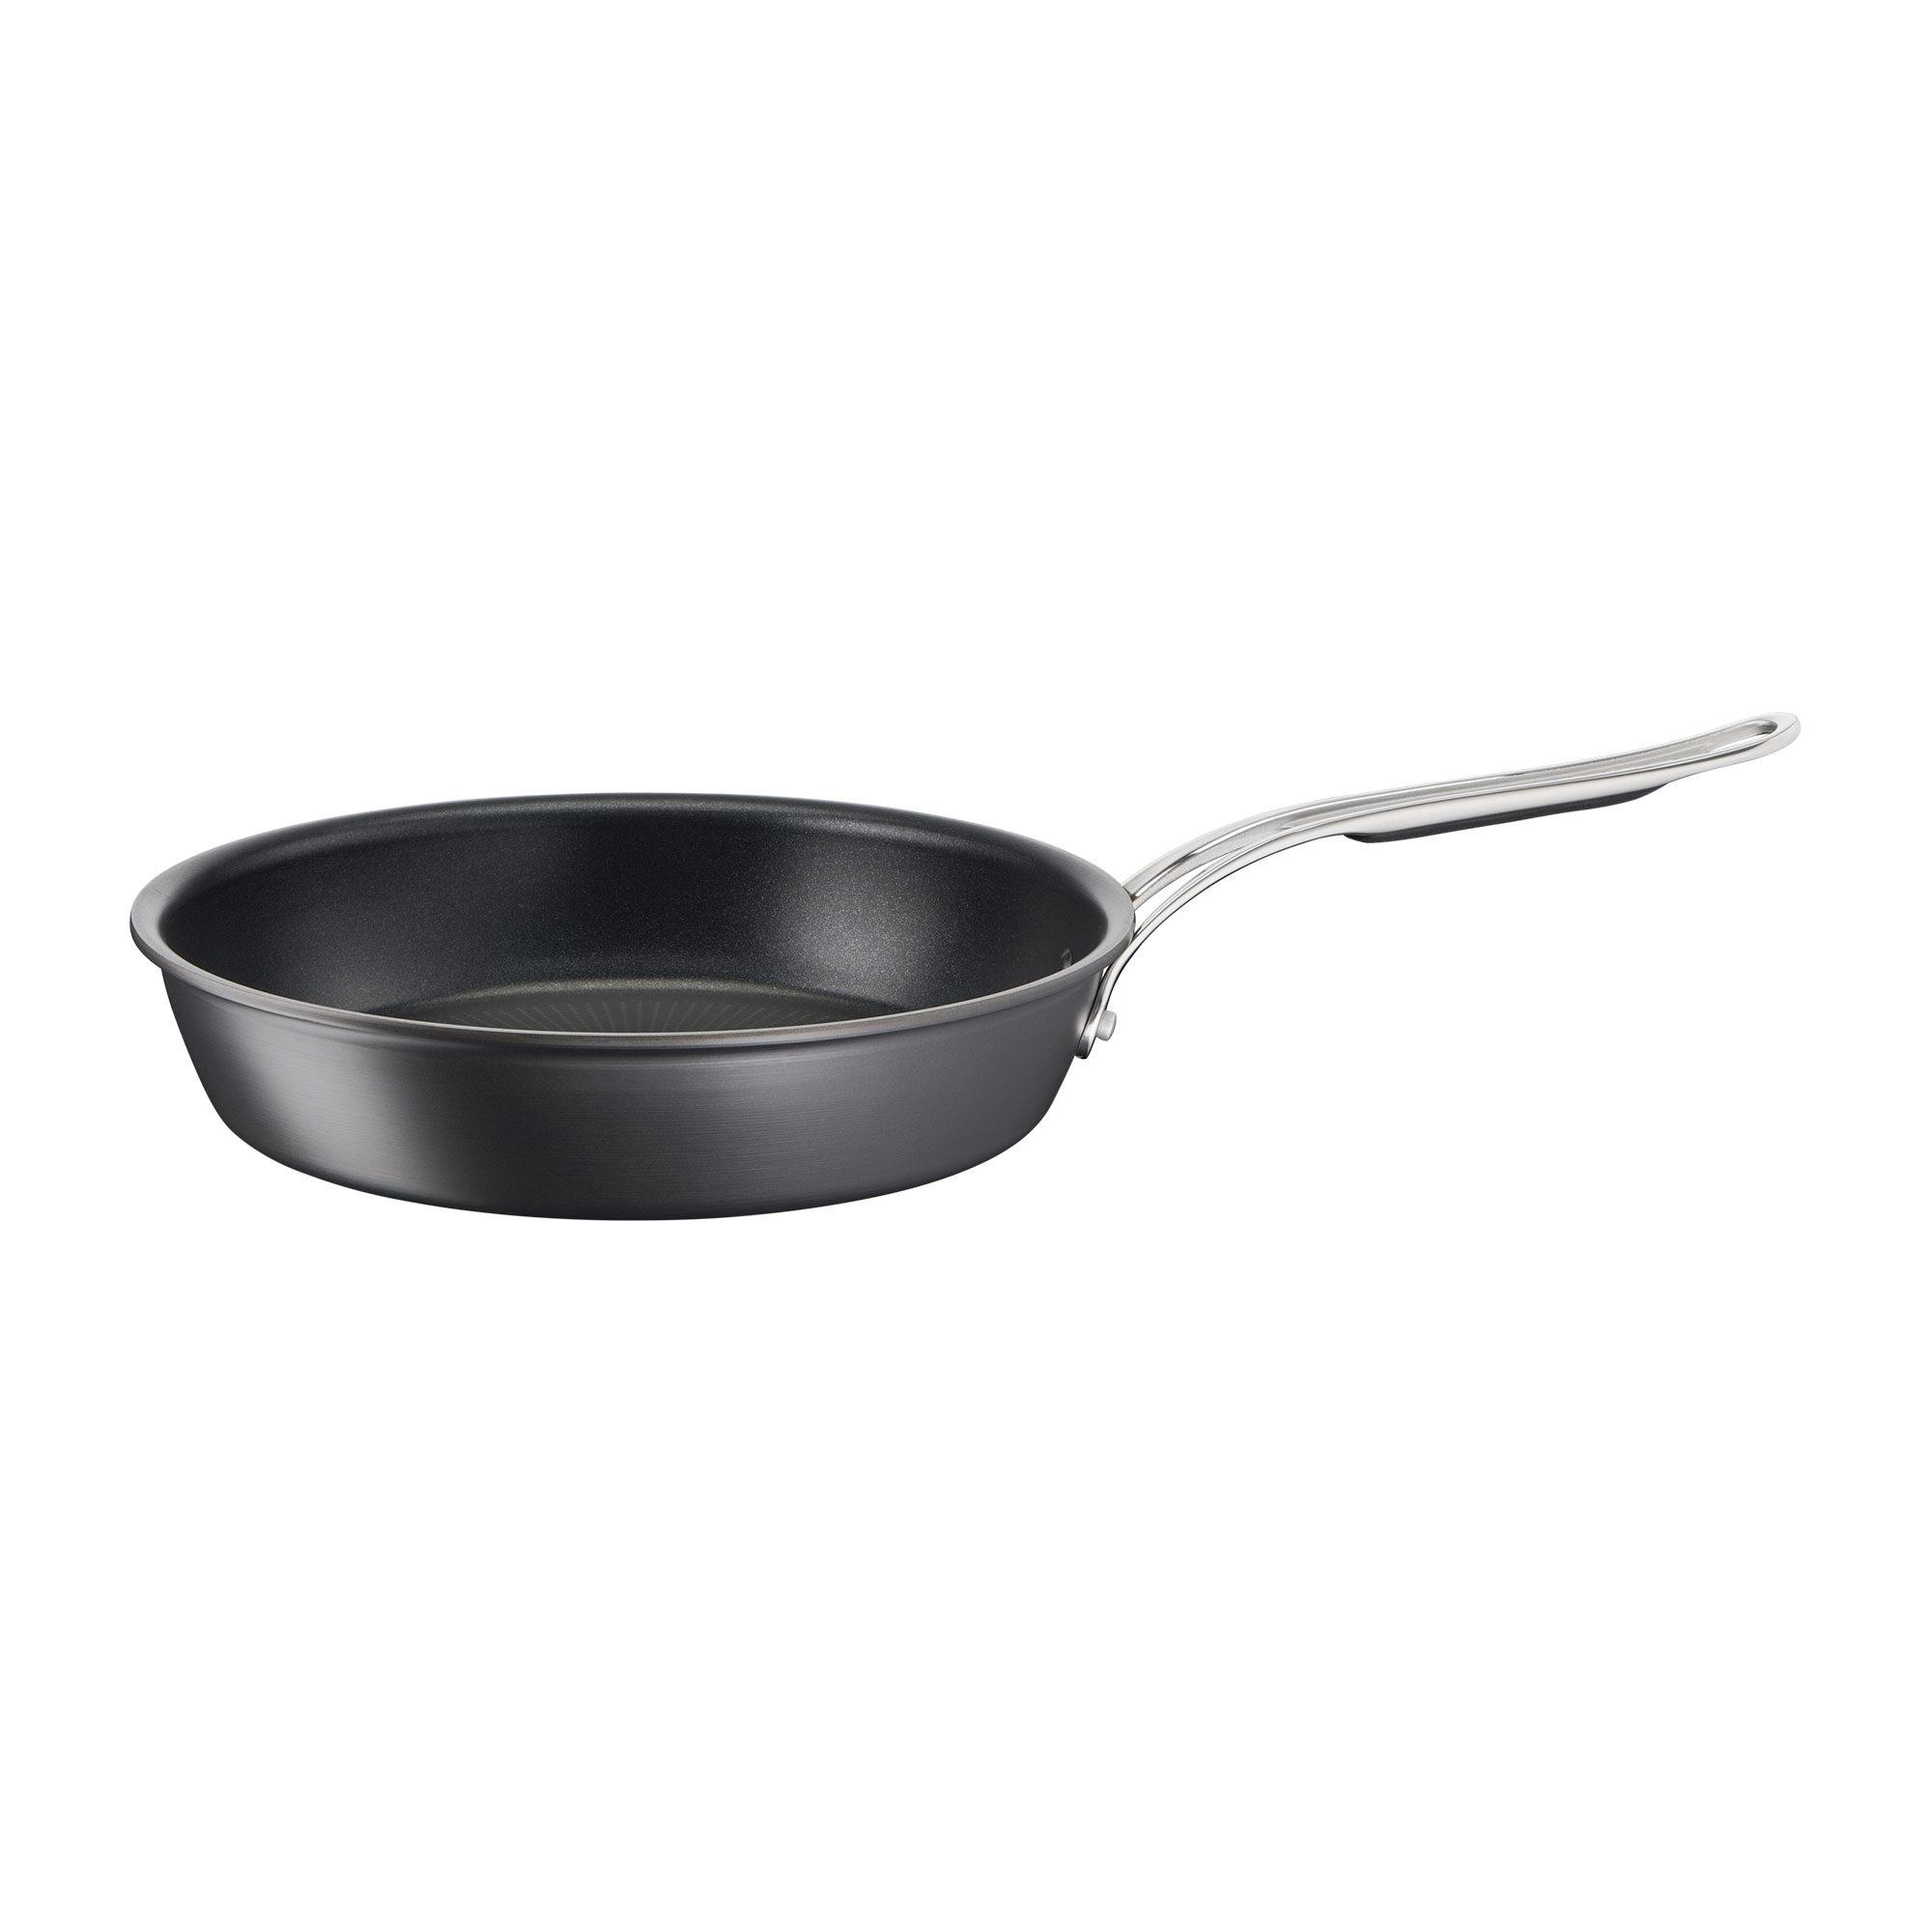 Jamie Oliver by Tefal Cook's Classic Hard Anodised Induction Frypan 30cm Image 3